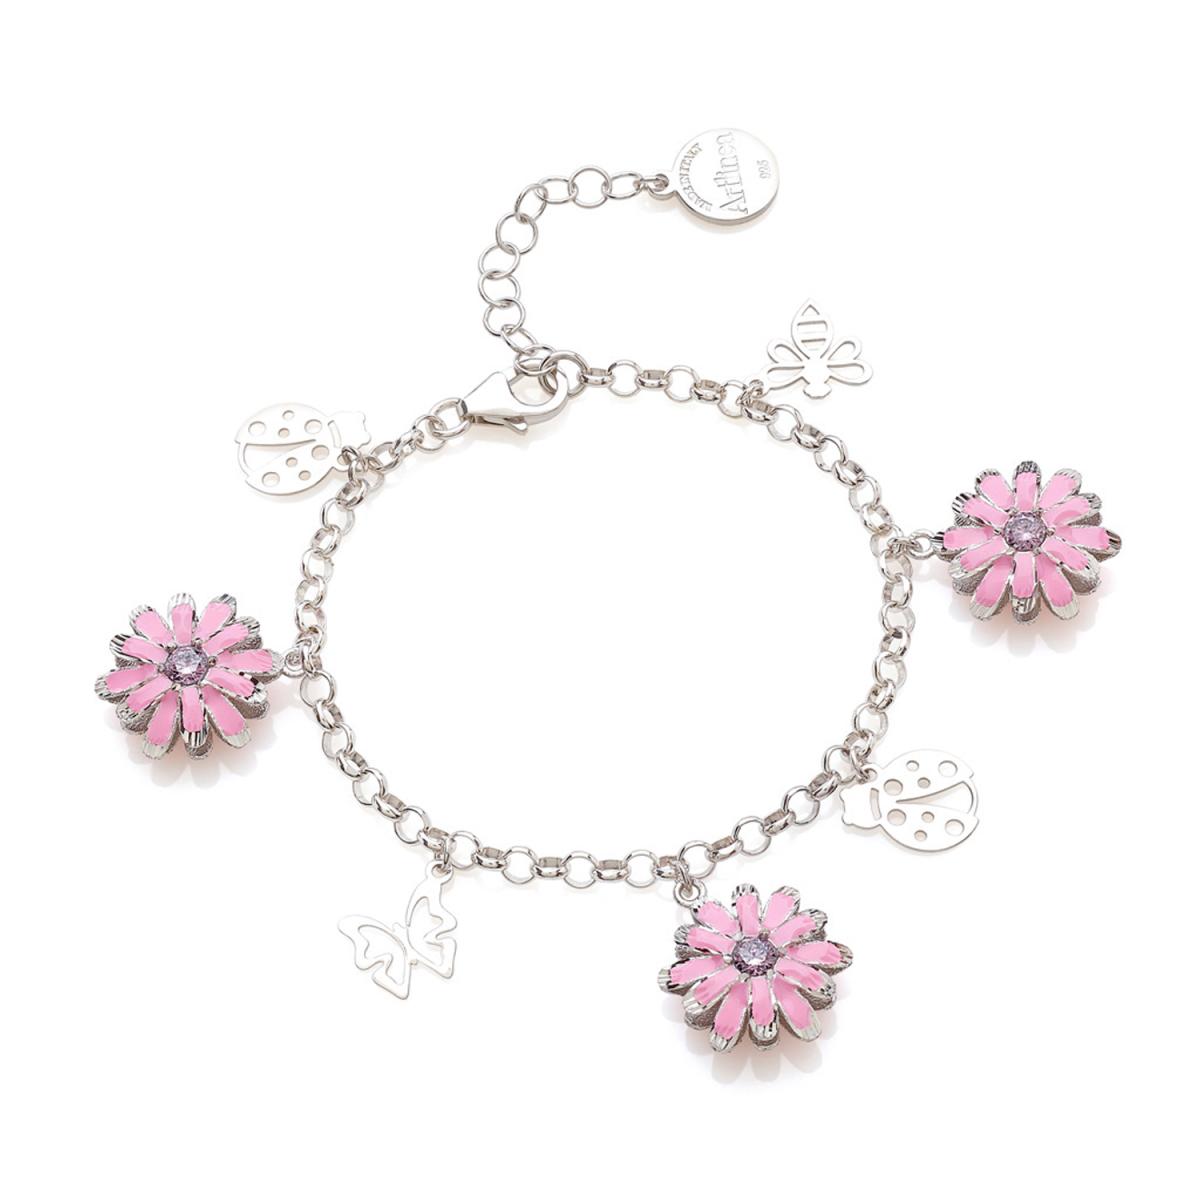 Double face Daisies charms bracelet in gilded or rhodium-plated 925 silver, enamel and cubic zirconia - ZBR680